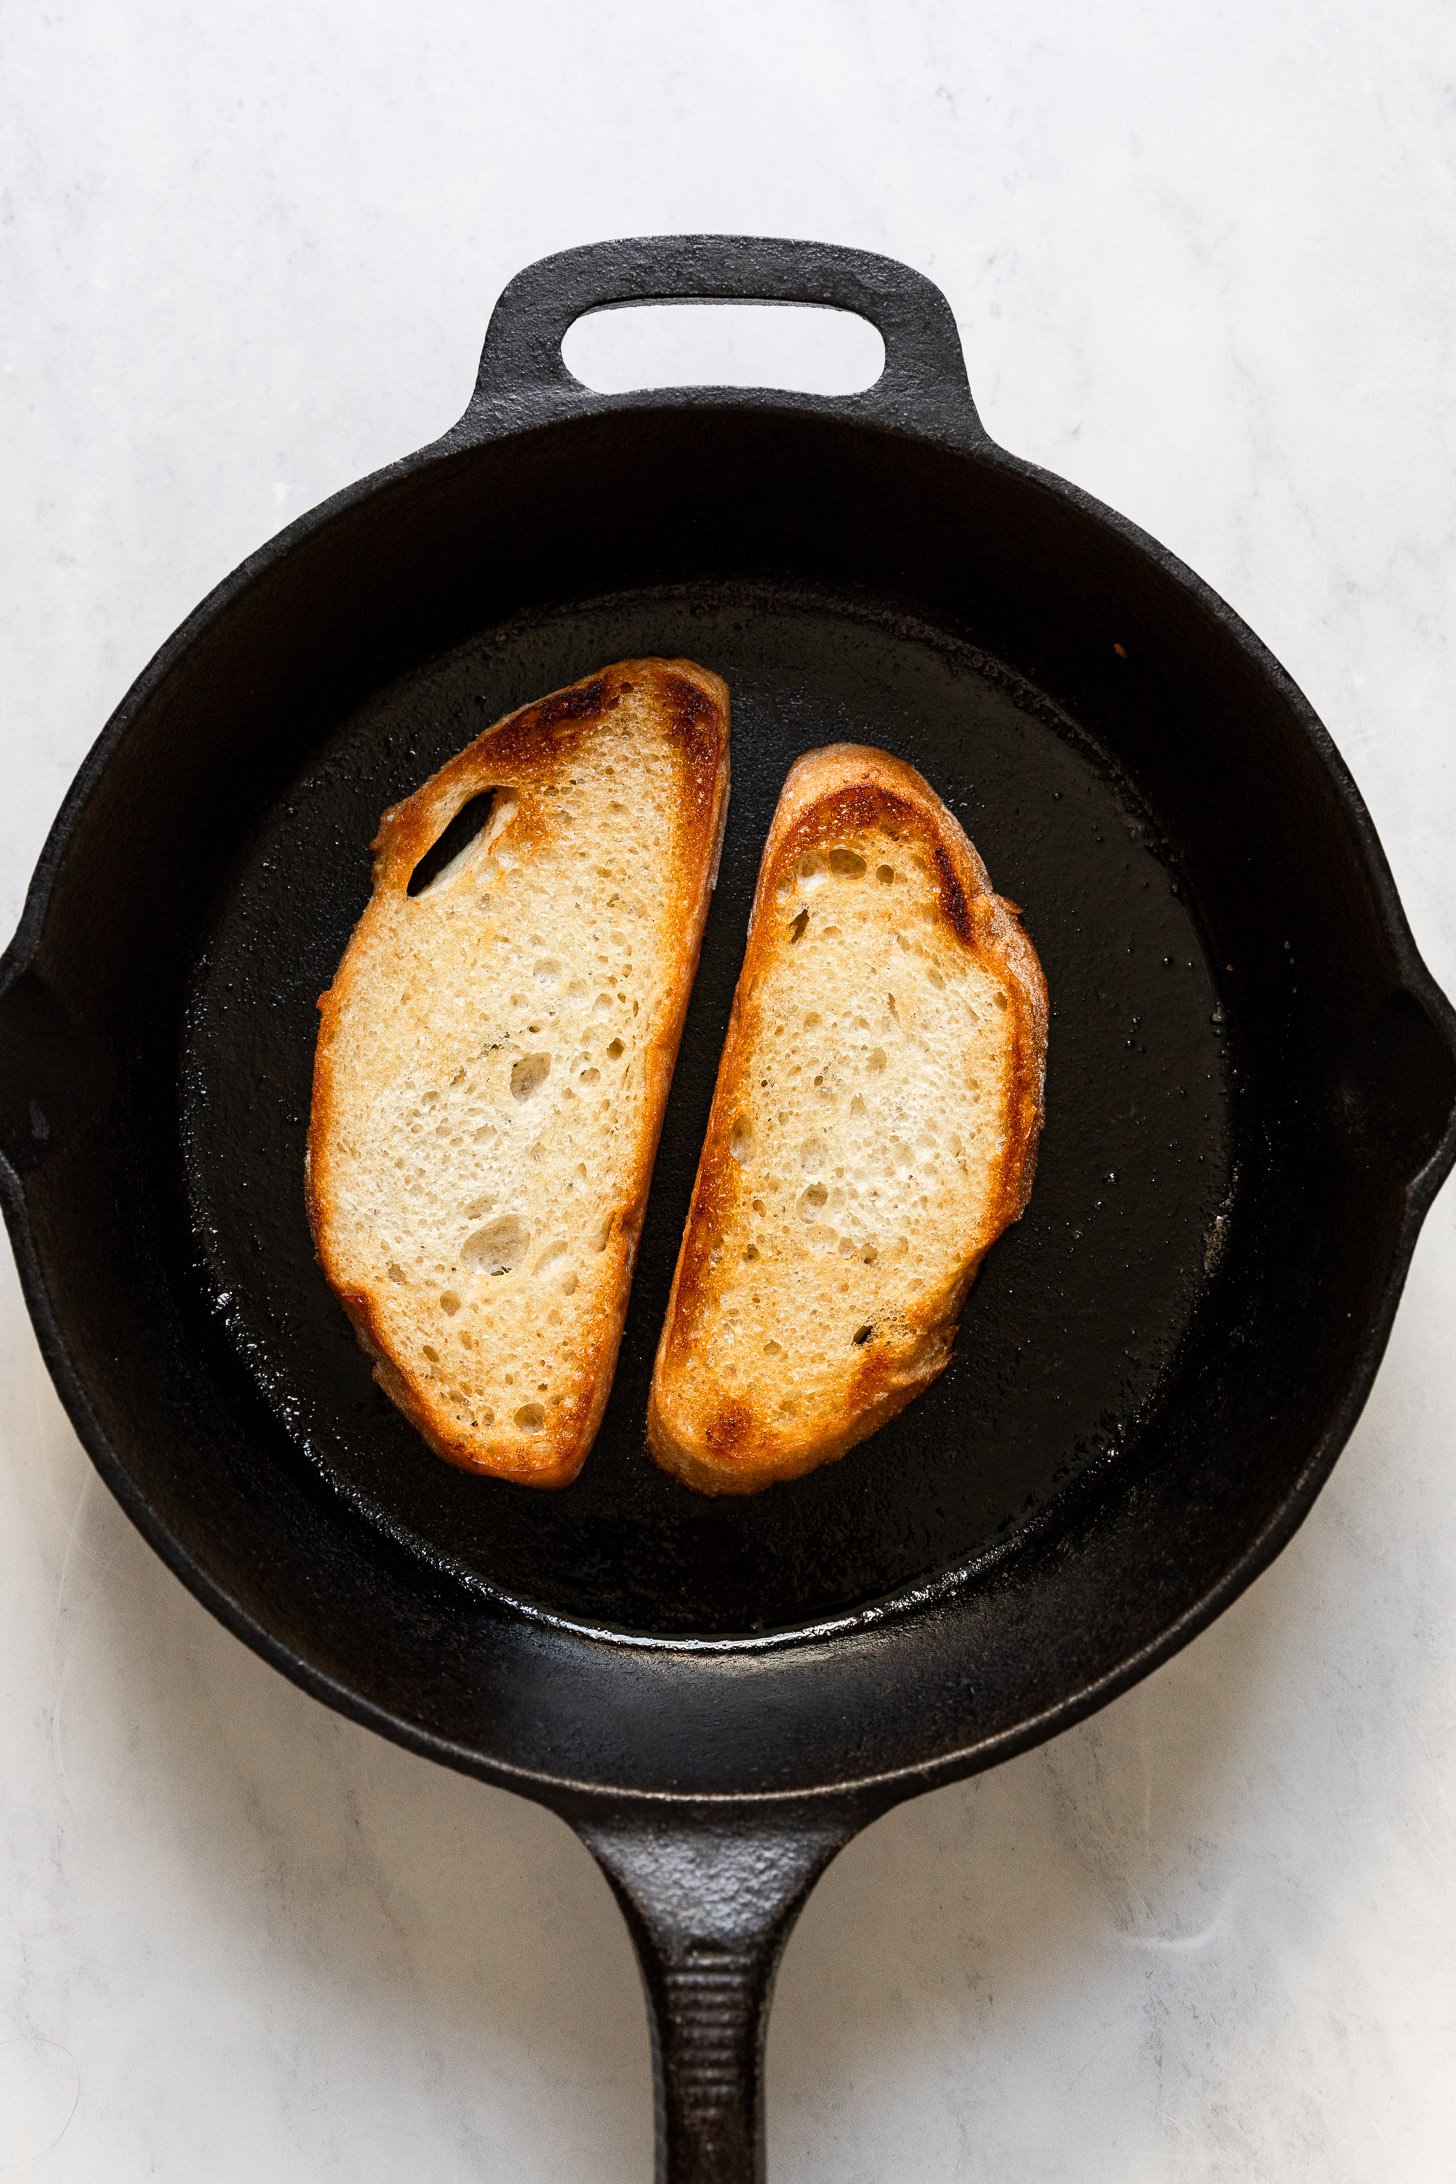 Bread slices in cast iron skillet after toasting.